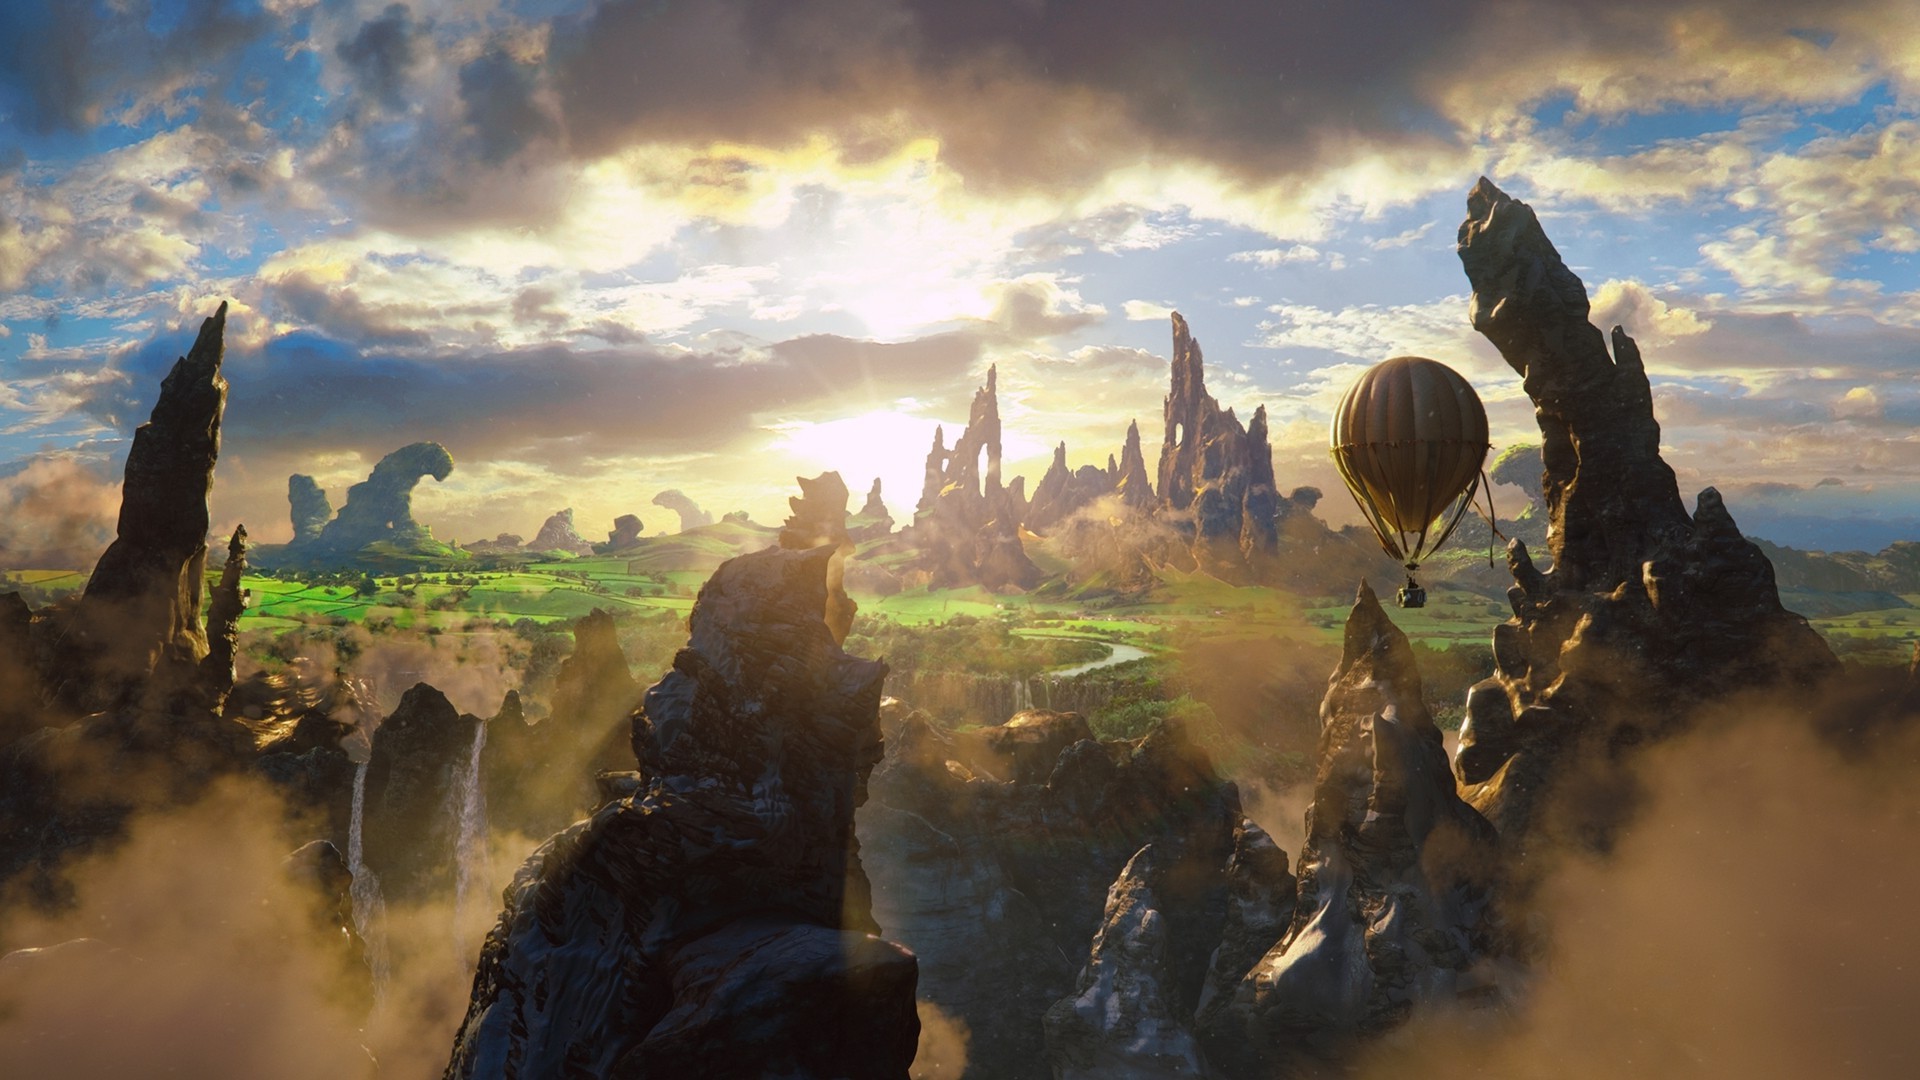 Fantasy Art Oz The Great And Powerful Wallpapers Hd Desktop And Images, Photos, Reviews